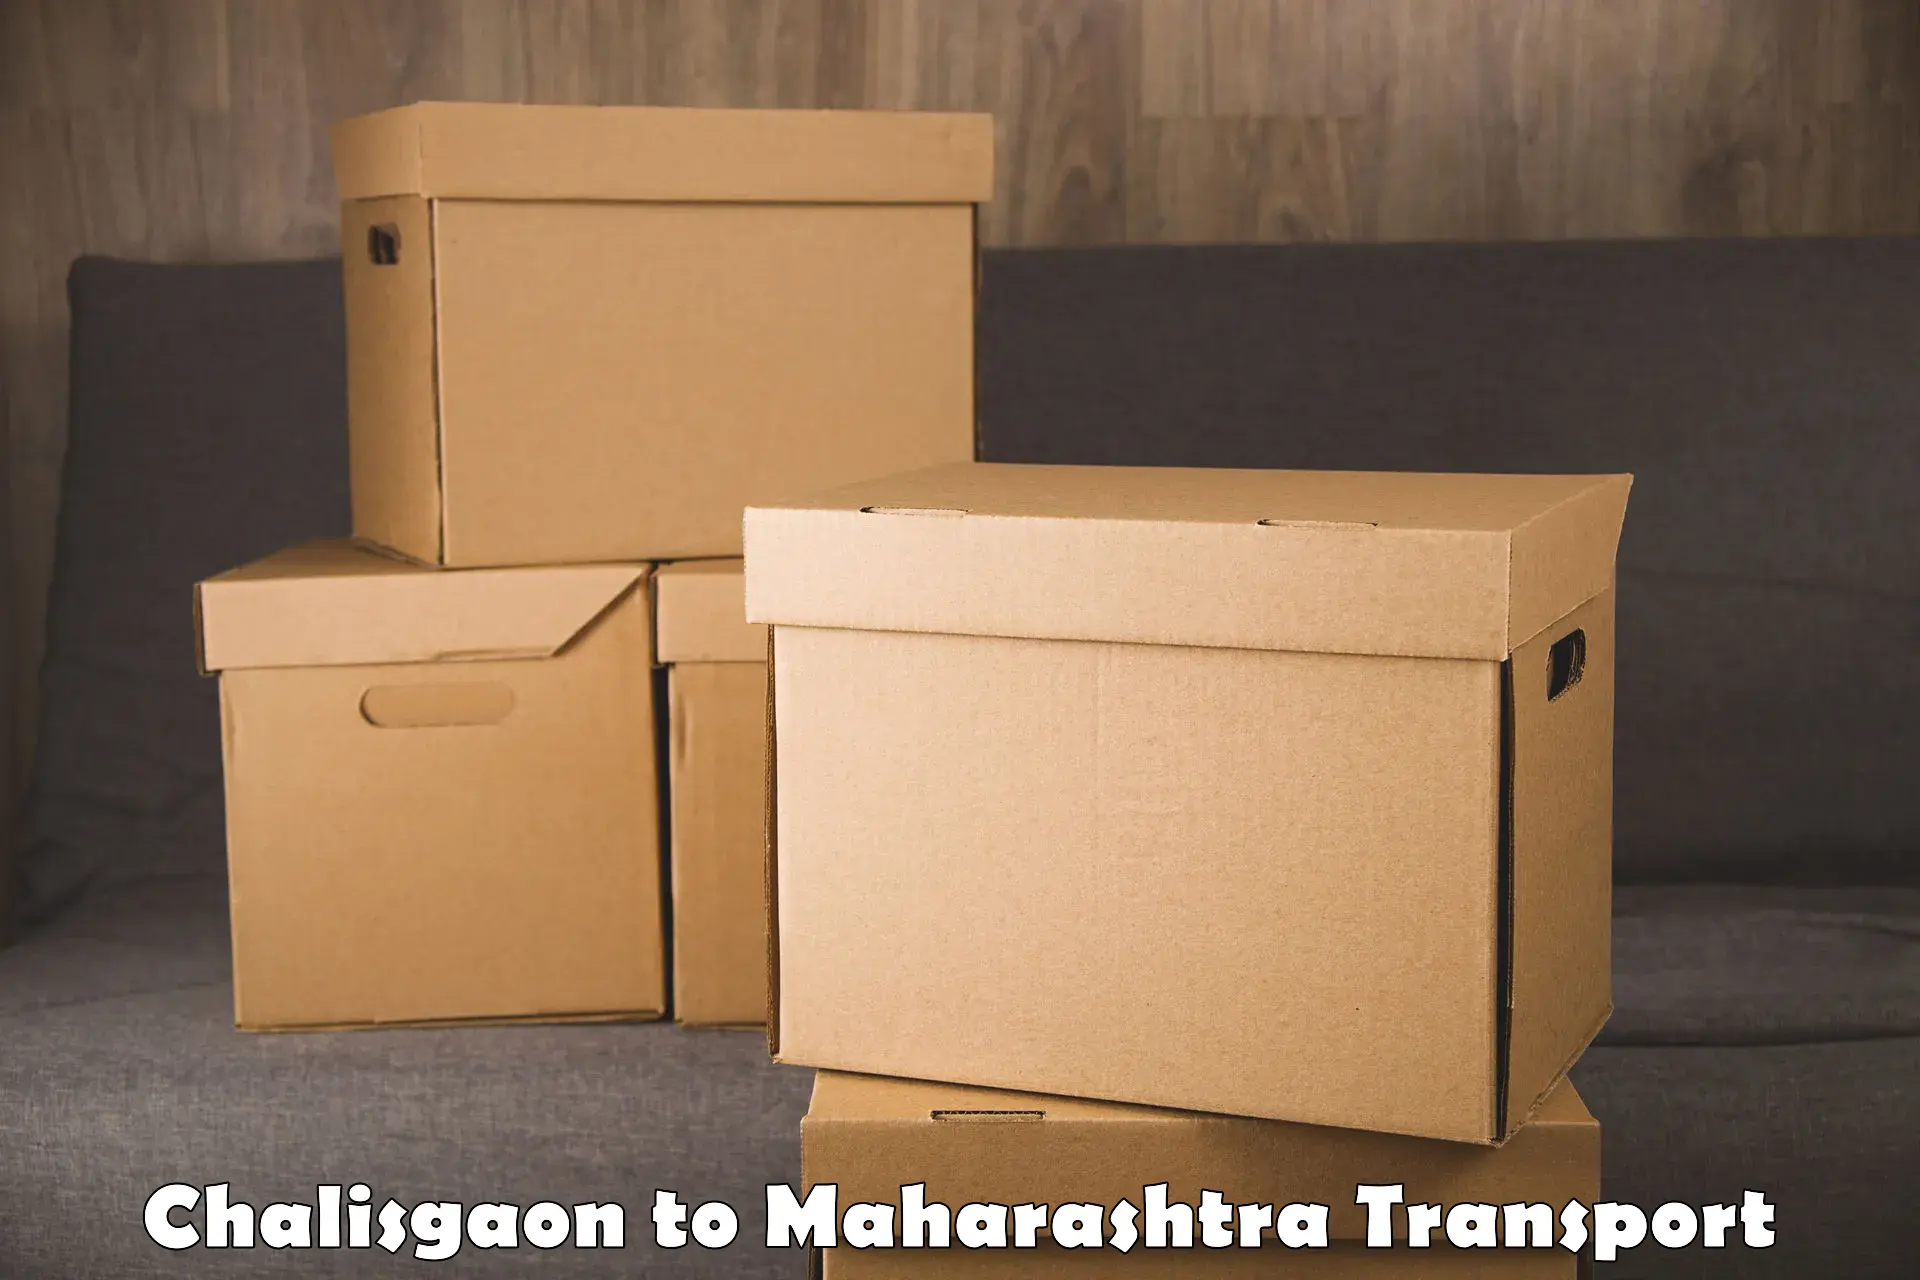 Truck transport companies in India Chalisgaon to Mul